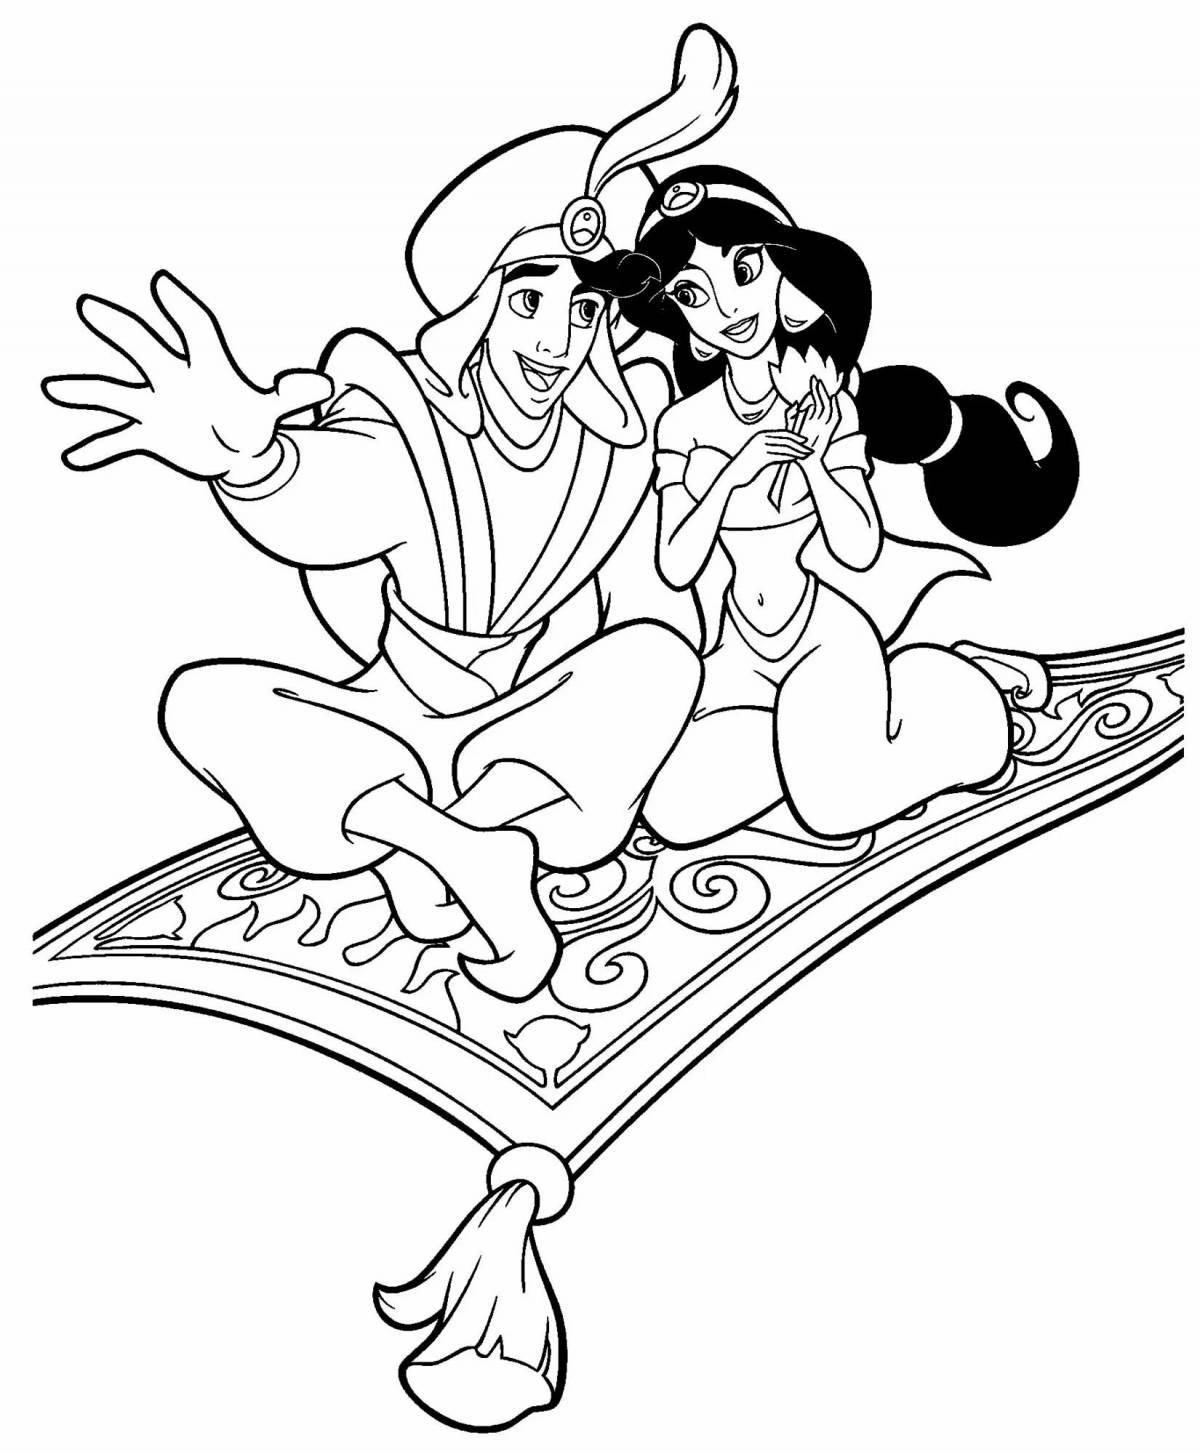 Aladdin's Gorgeous Coloring Page